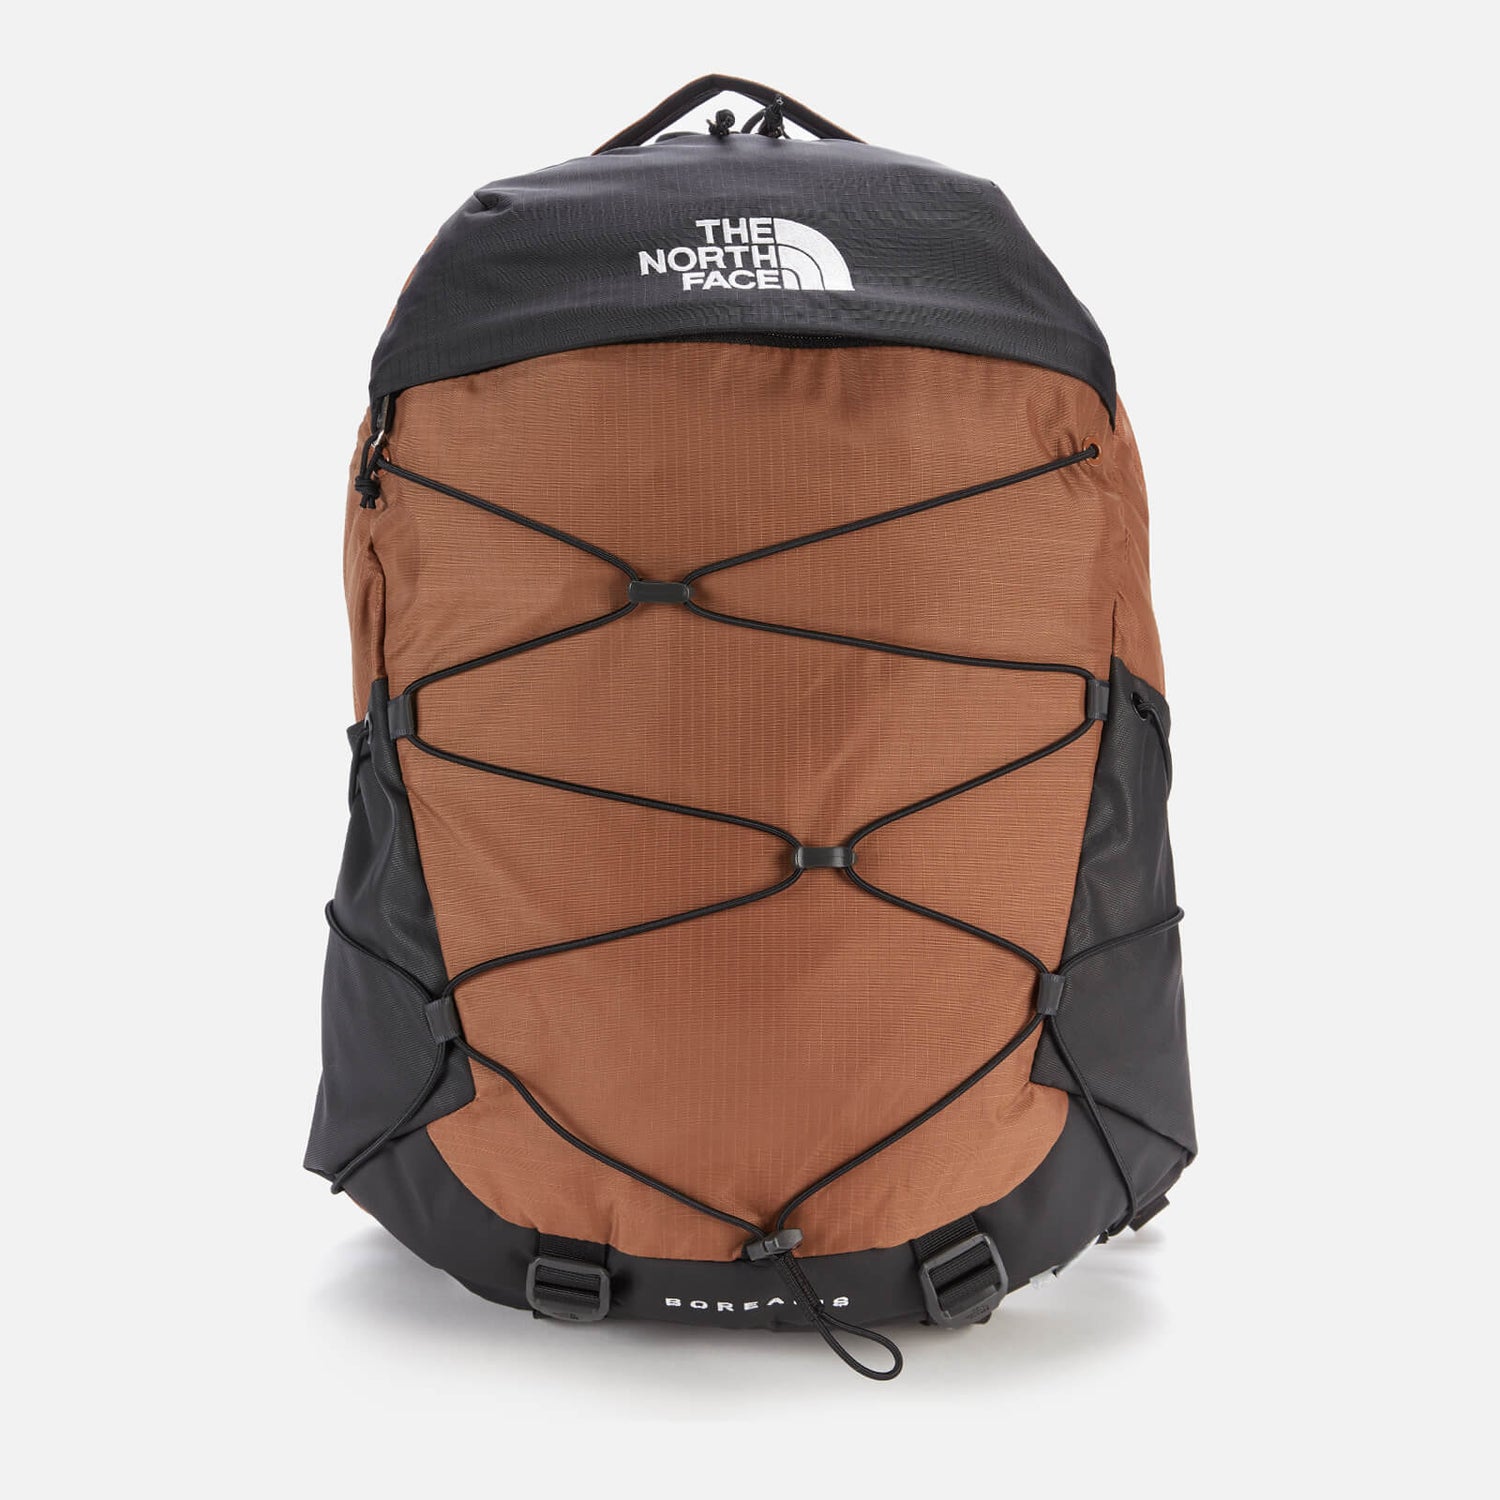 The North Face Borealis Backpack - Pinecone Brown/TNF Black